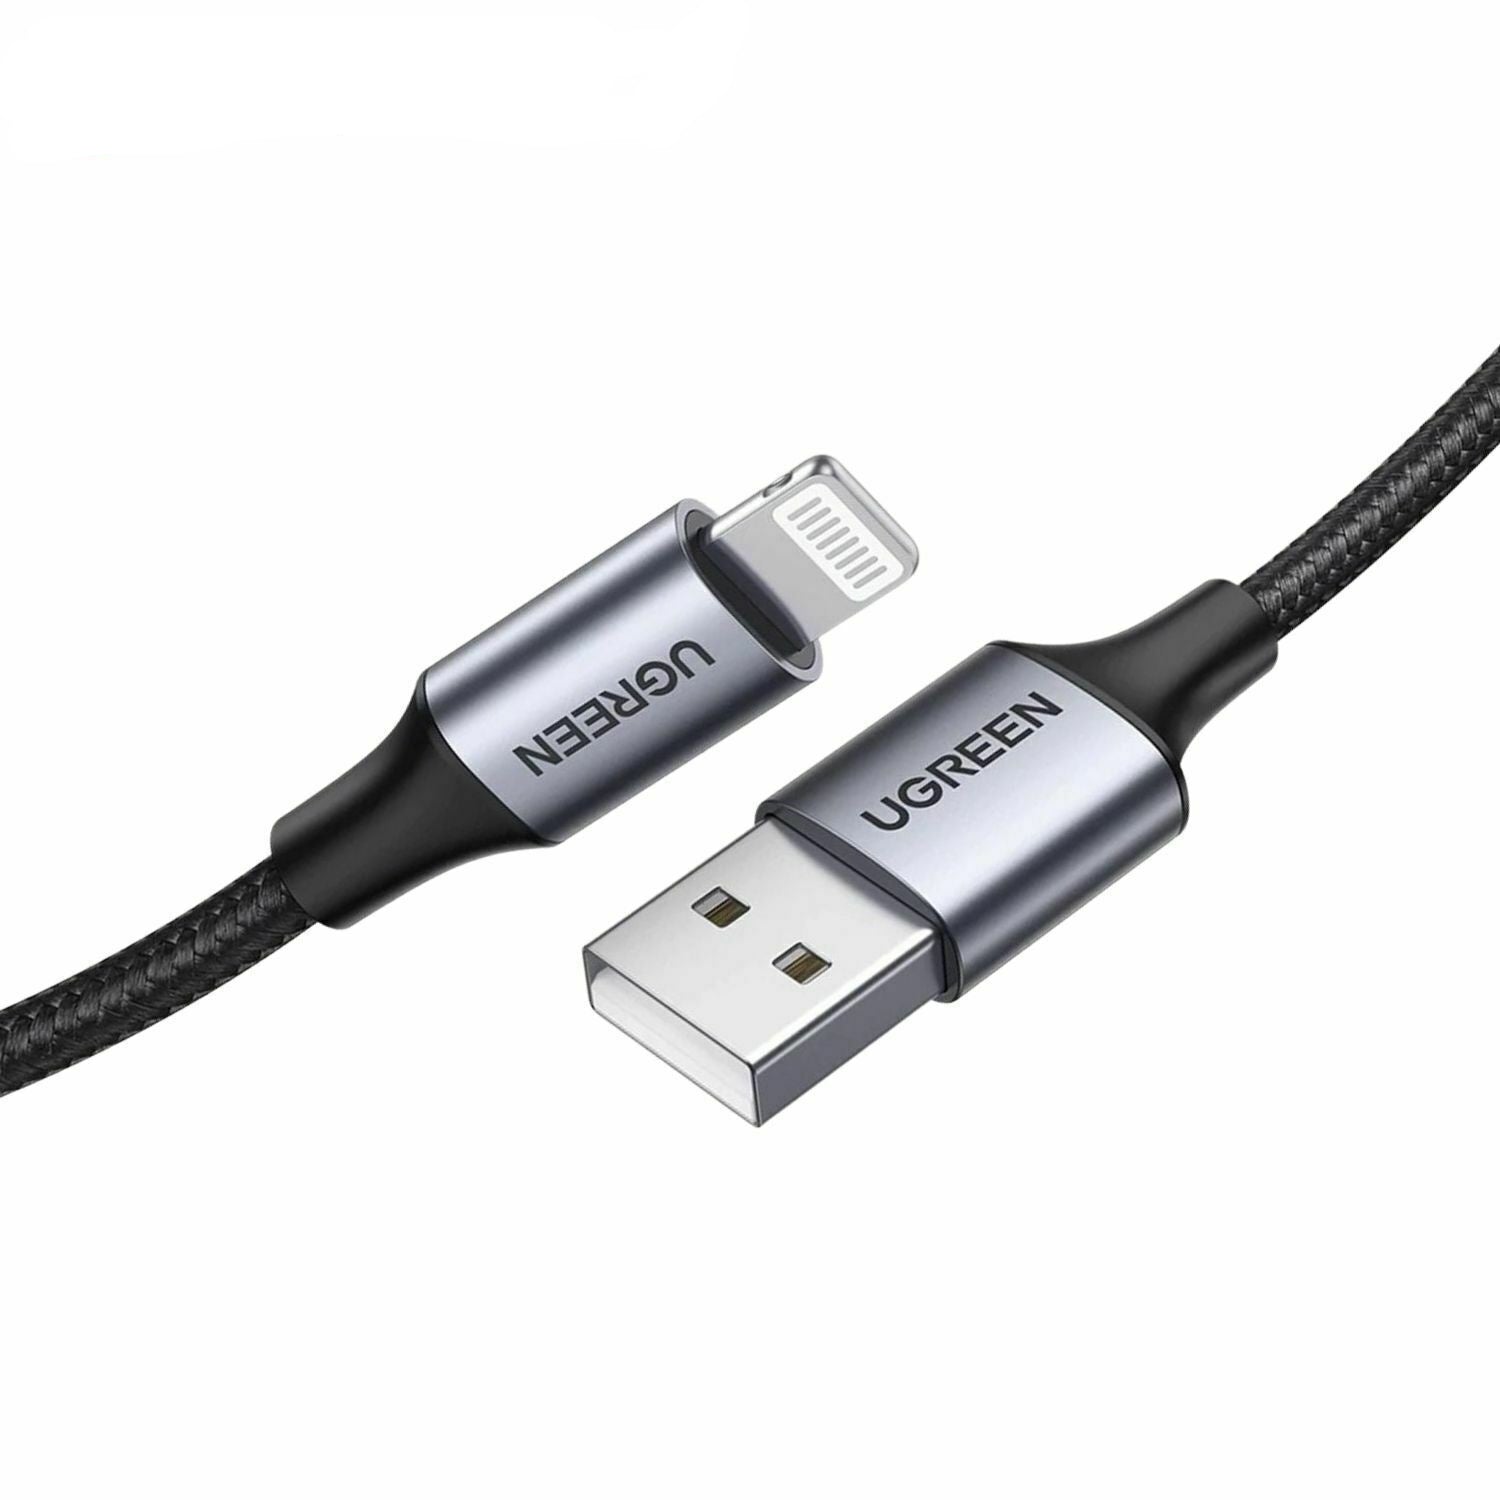 Cable Lightning to USB UGREEN 2.4A US199, 1m (Black)